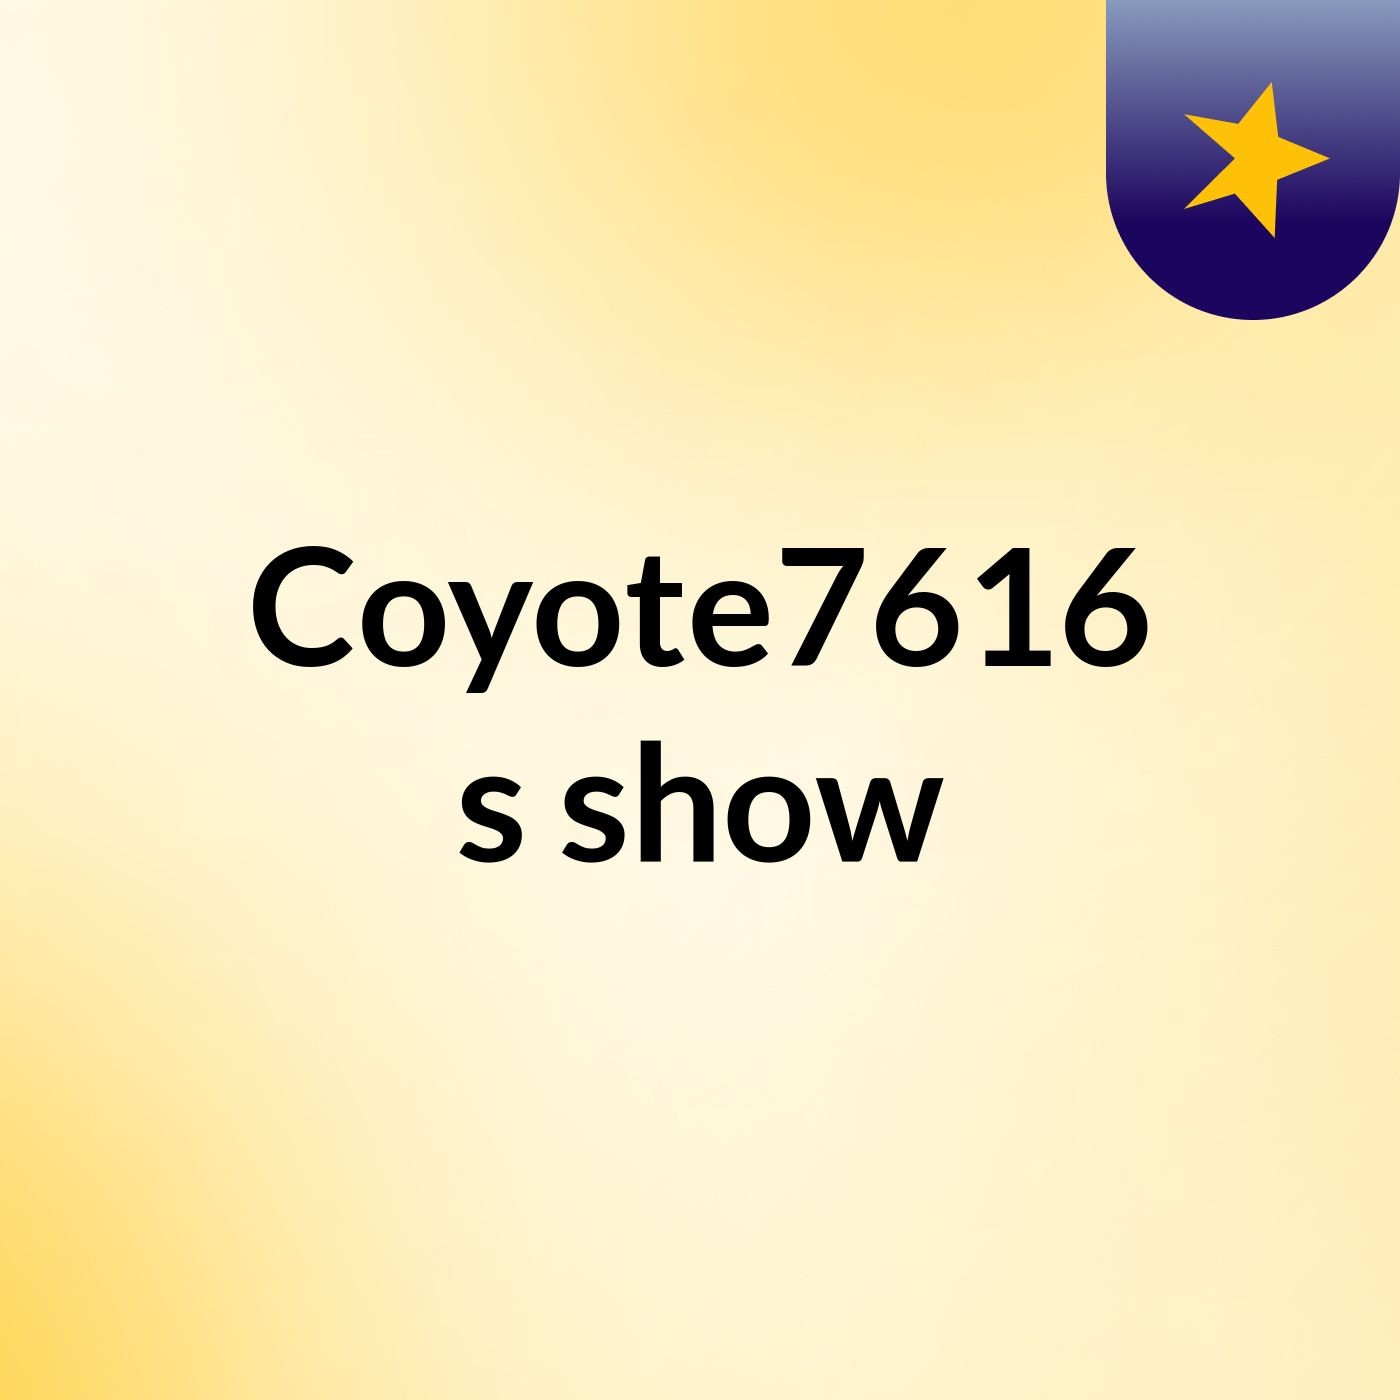 Coyote7616's show